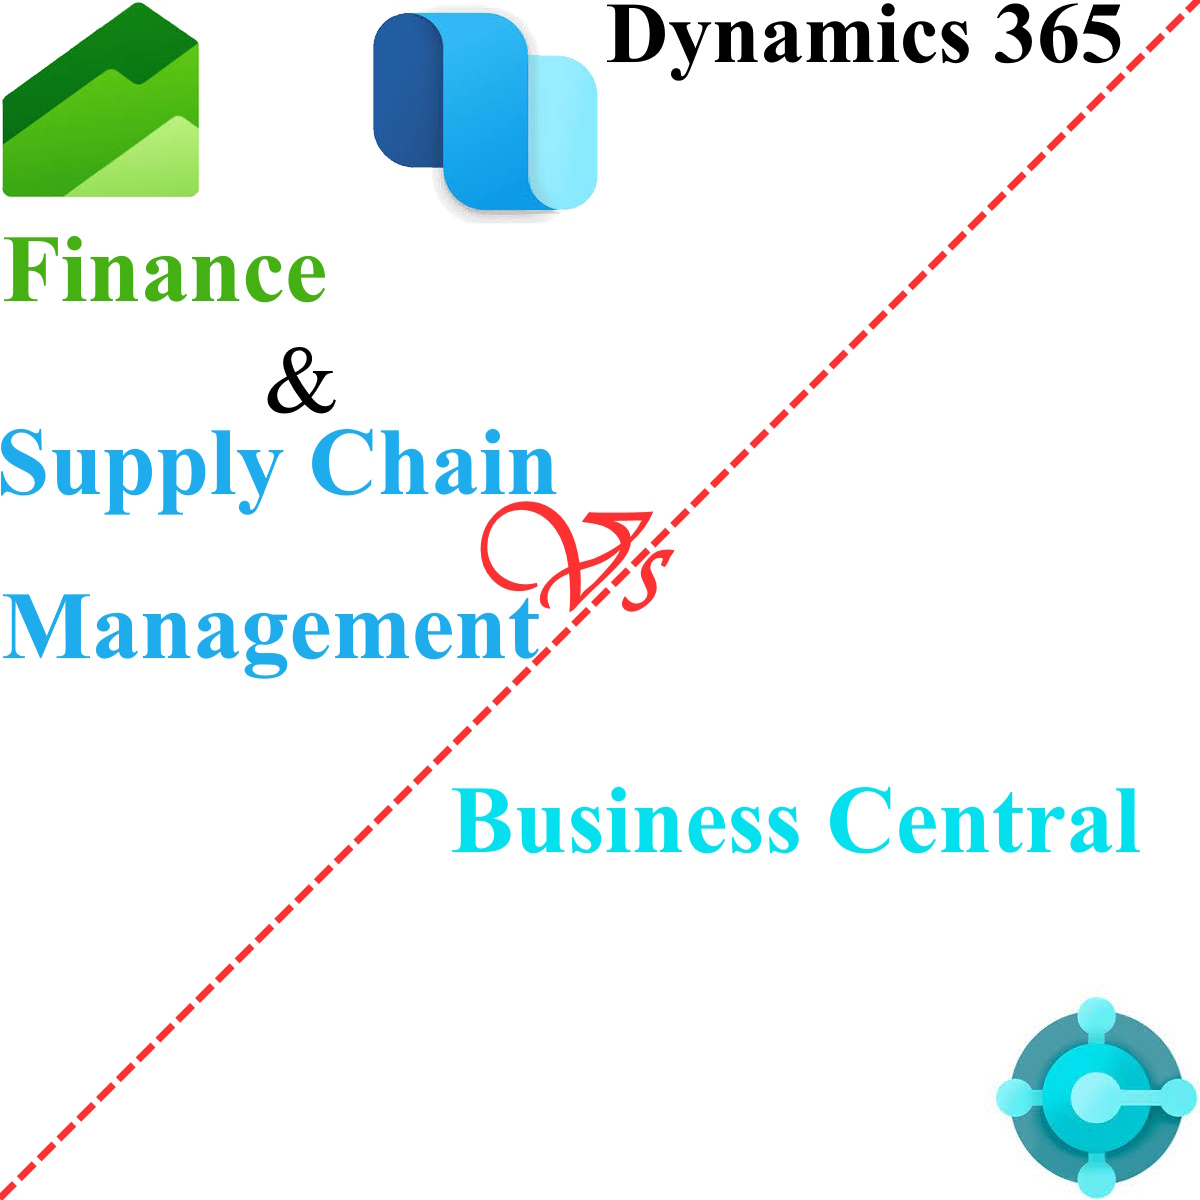 You are currently viewing Microsoft Dynamics 365 Finance and Supply Chain Management vs Dynamics 365 Business Central